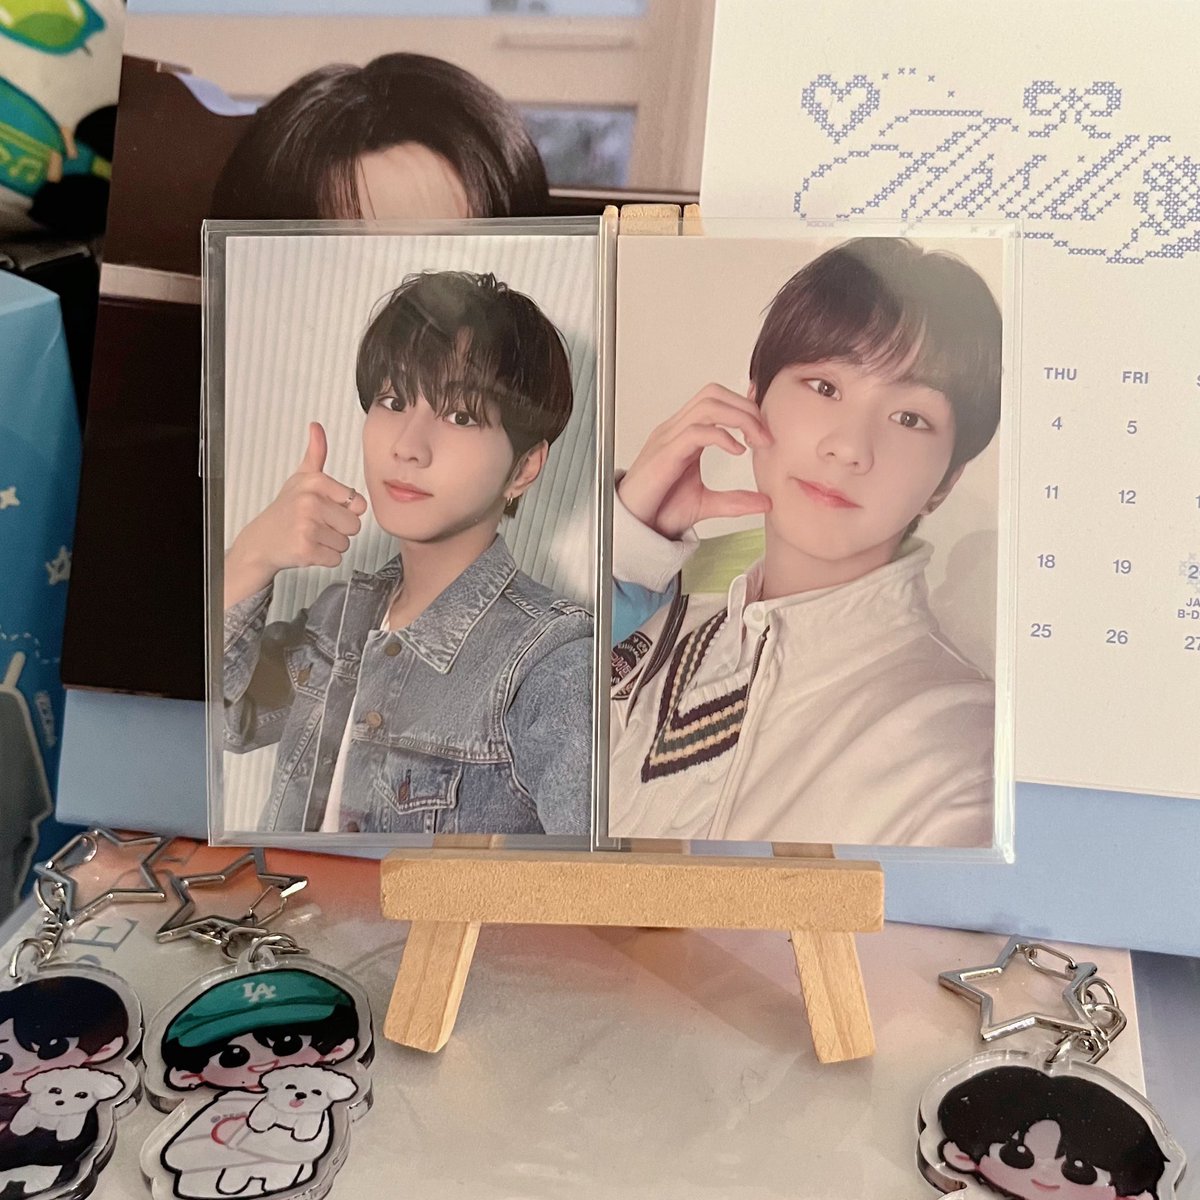 ✴︎ #reivesells — wts lfb ph ☻ !i 
   ╰ enhypen jungwon enniversary 2022
        2023 photoframe photocard

⦂ ₱25O | ₱2OO
⦂ payo or 2 weeks w/ nrdp. 
⦂ onhand and ready to ship!
⦂ reply / dm mine to claim
⦂ rcbyt — reivenwon.carrd.co